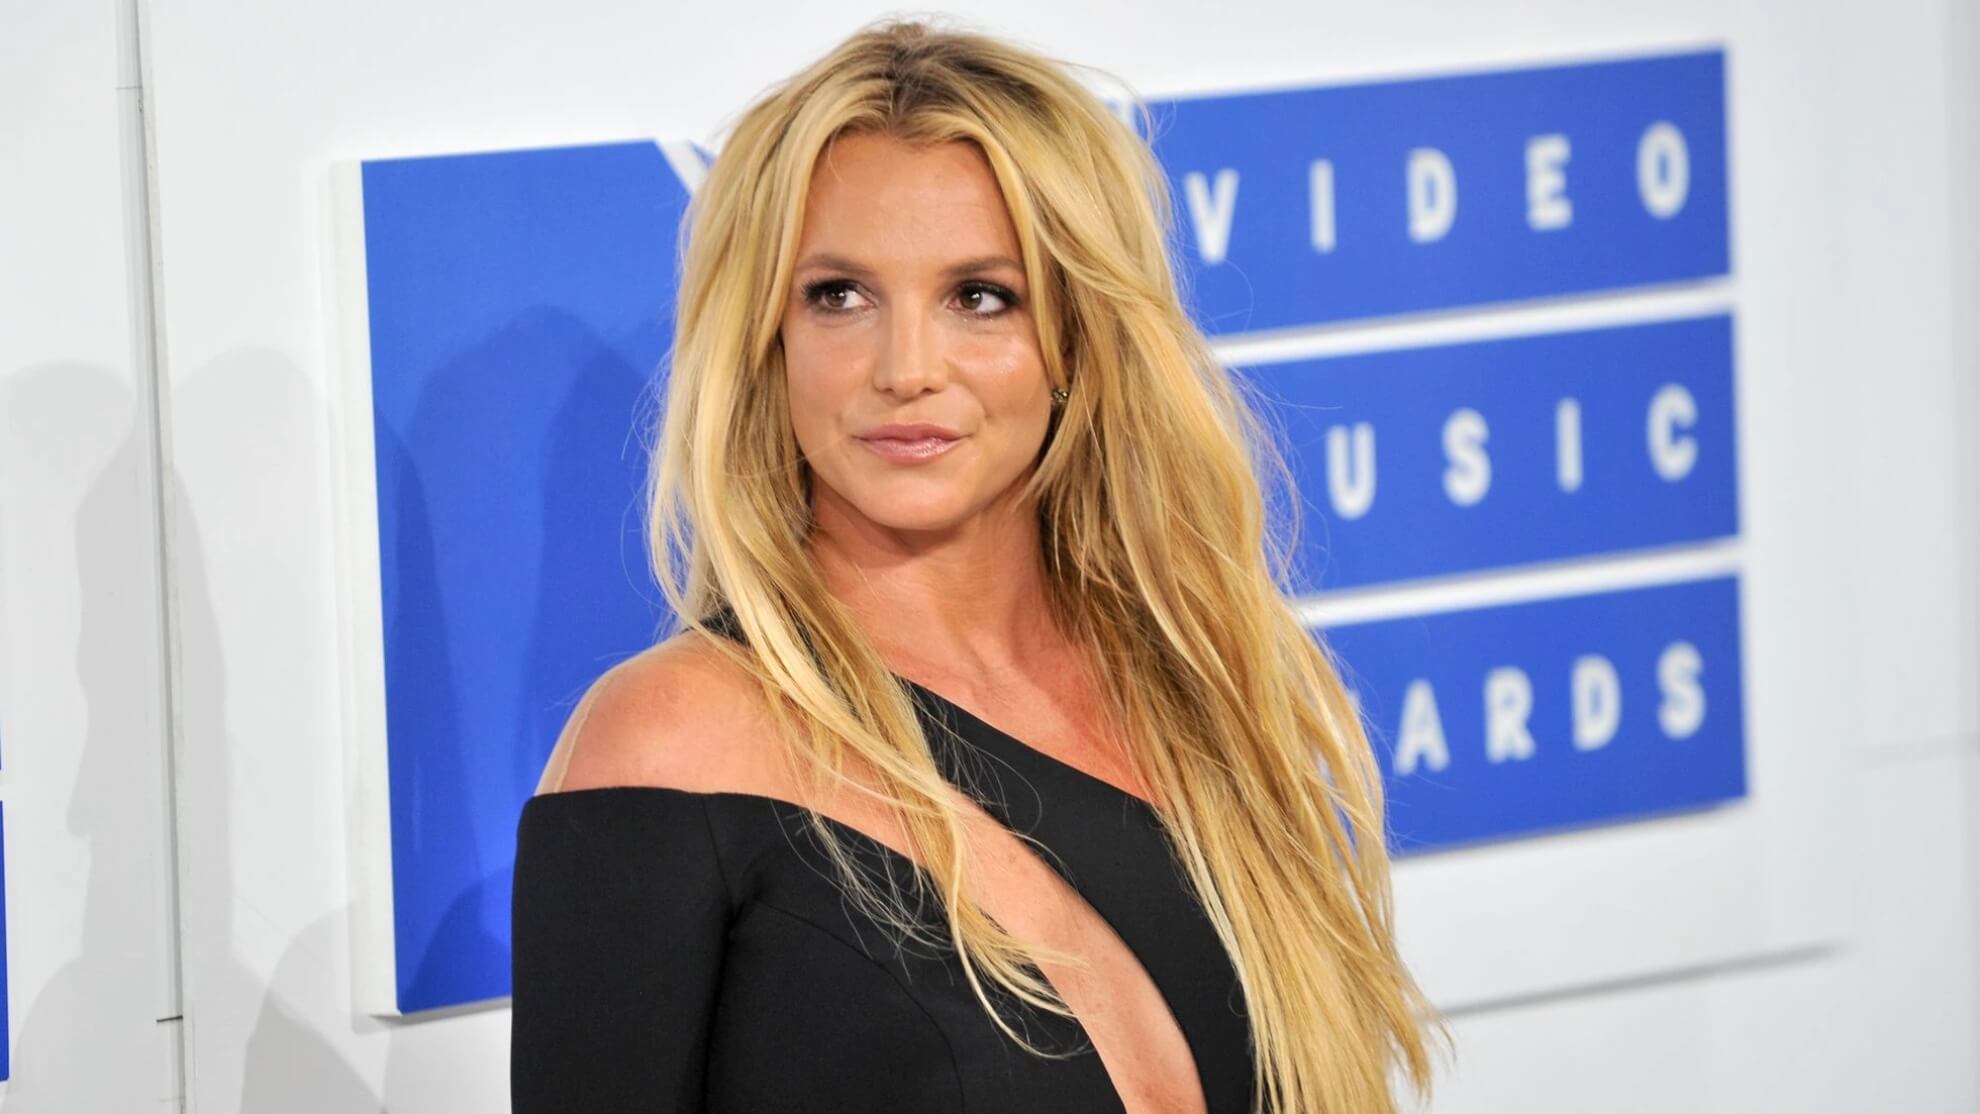 Britney Spears angrily names celebrities who didn't faced issue like her 